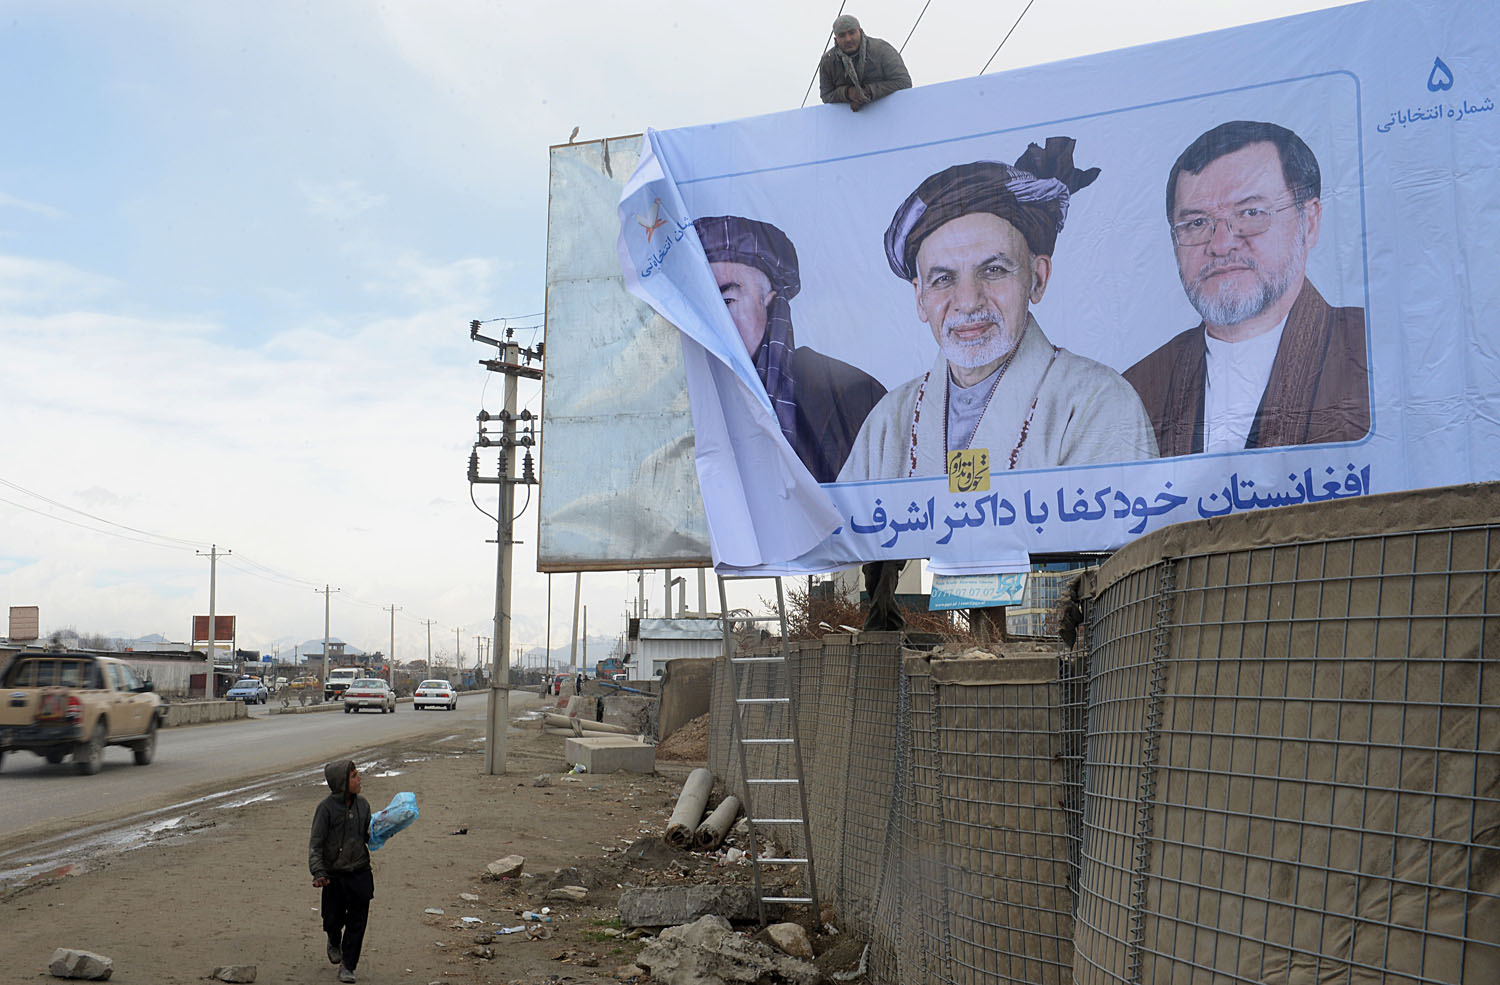 Afghan workers install an election campaign poster of Afghan presidential candidate Ashraf Ghani Ahmadzai in Kabul on Feb. 3, 2014. (Shah Marai&mdash;AFP/Getty Images)